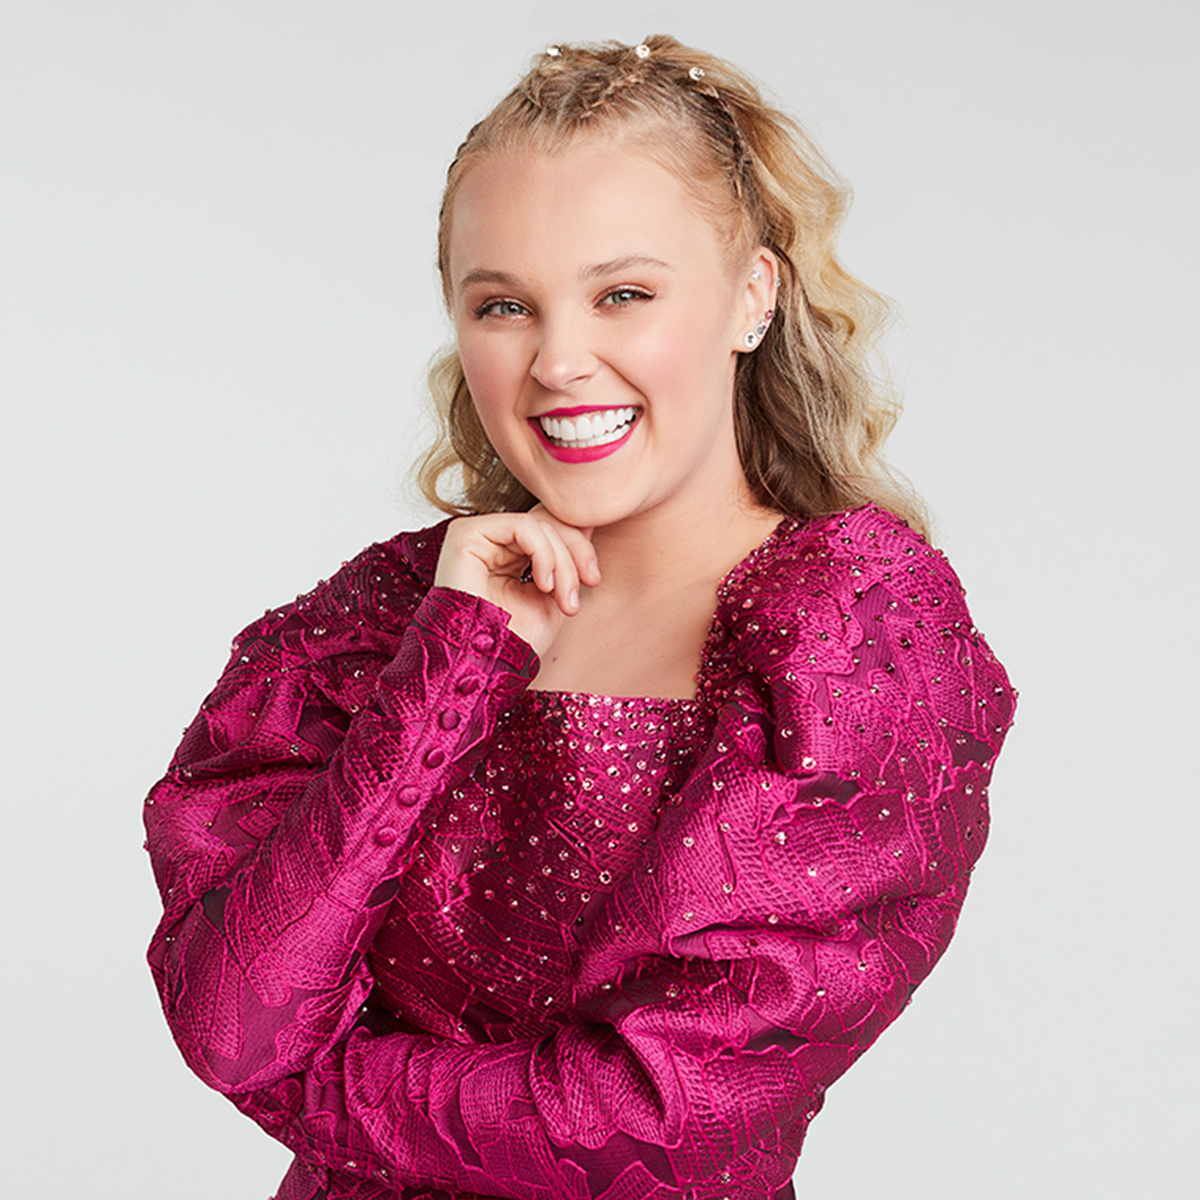 JoJo Siwa Relates To Britney Spears With “Hard” Experience As A Child Star